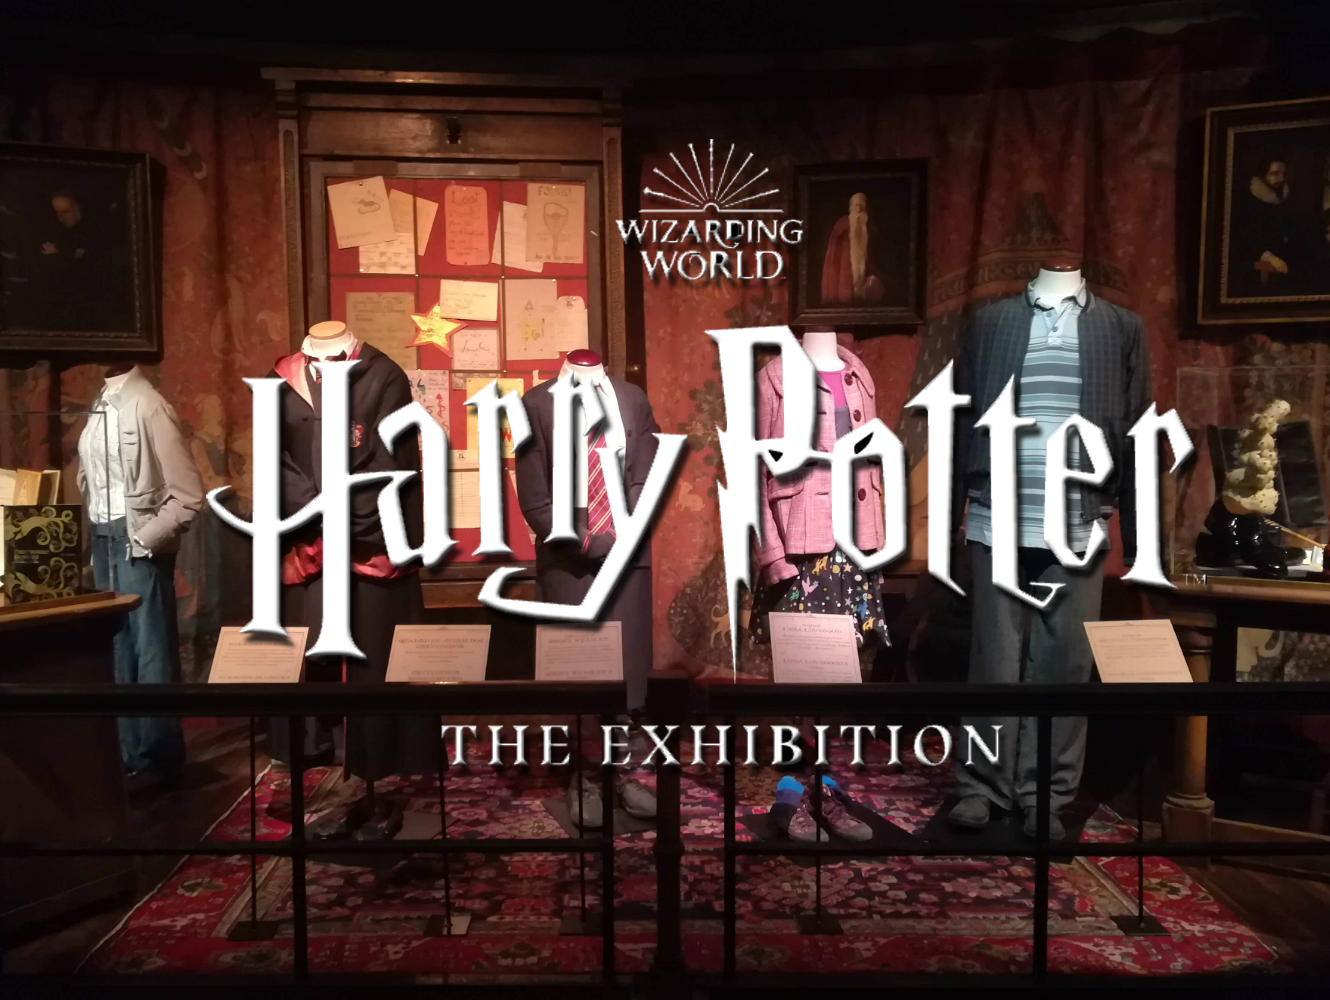 Harry Potter the exhibition